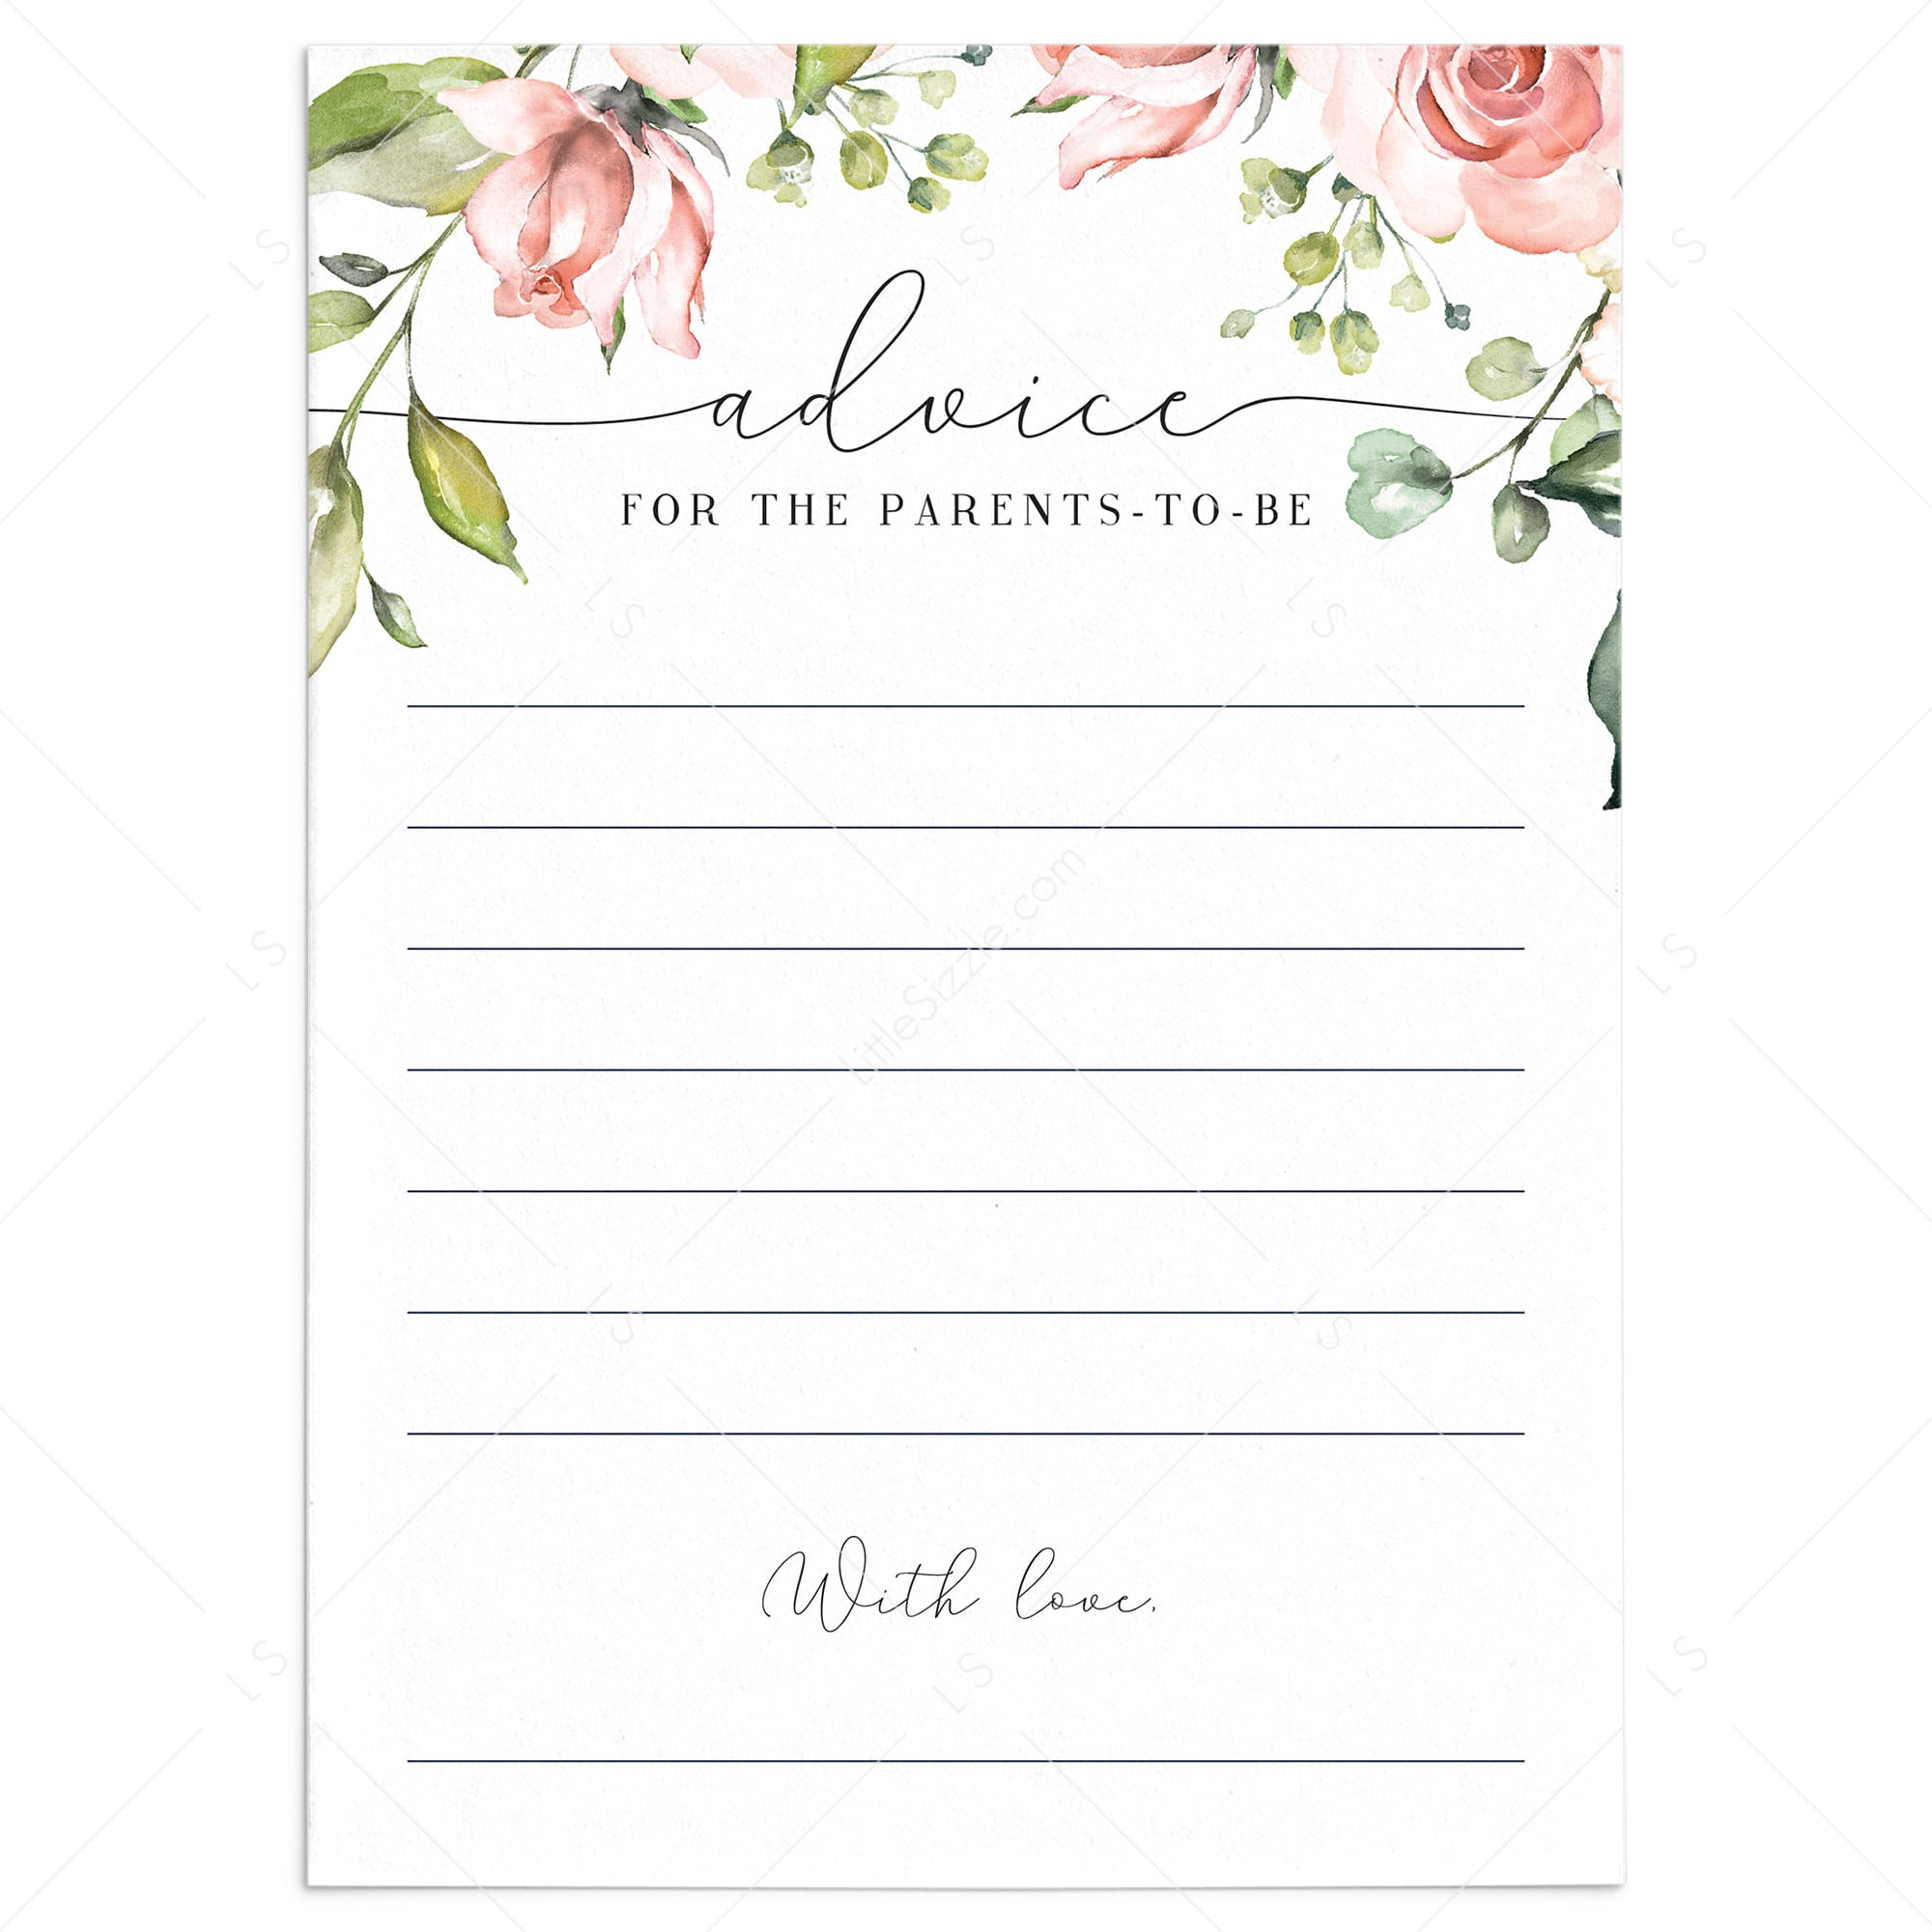 Printable baby advice for parents to be cards floral theme by LittleSizzle